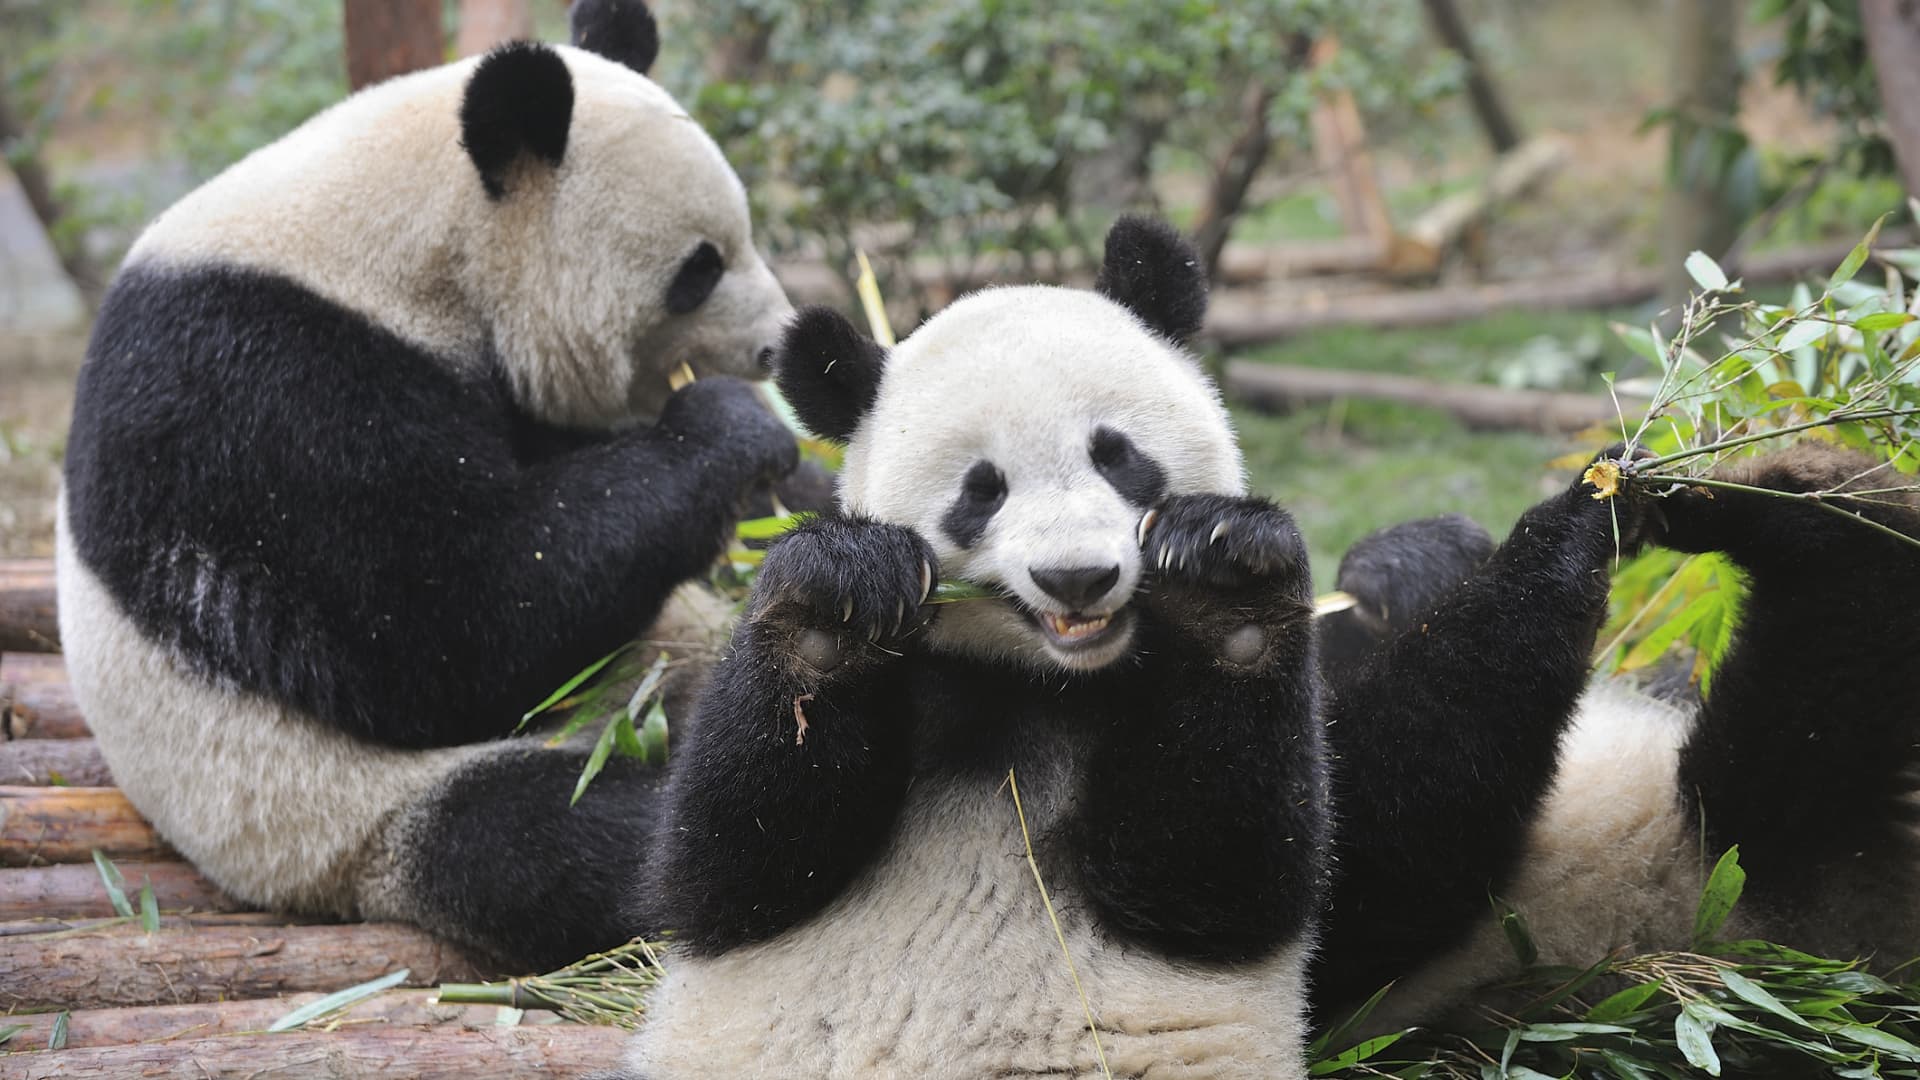 China sends giant pandas to the US for the first time in 20 years